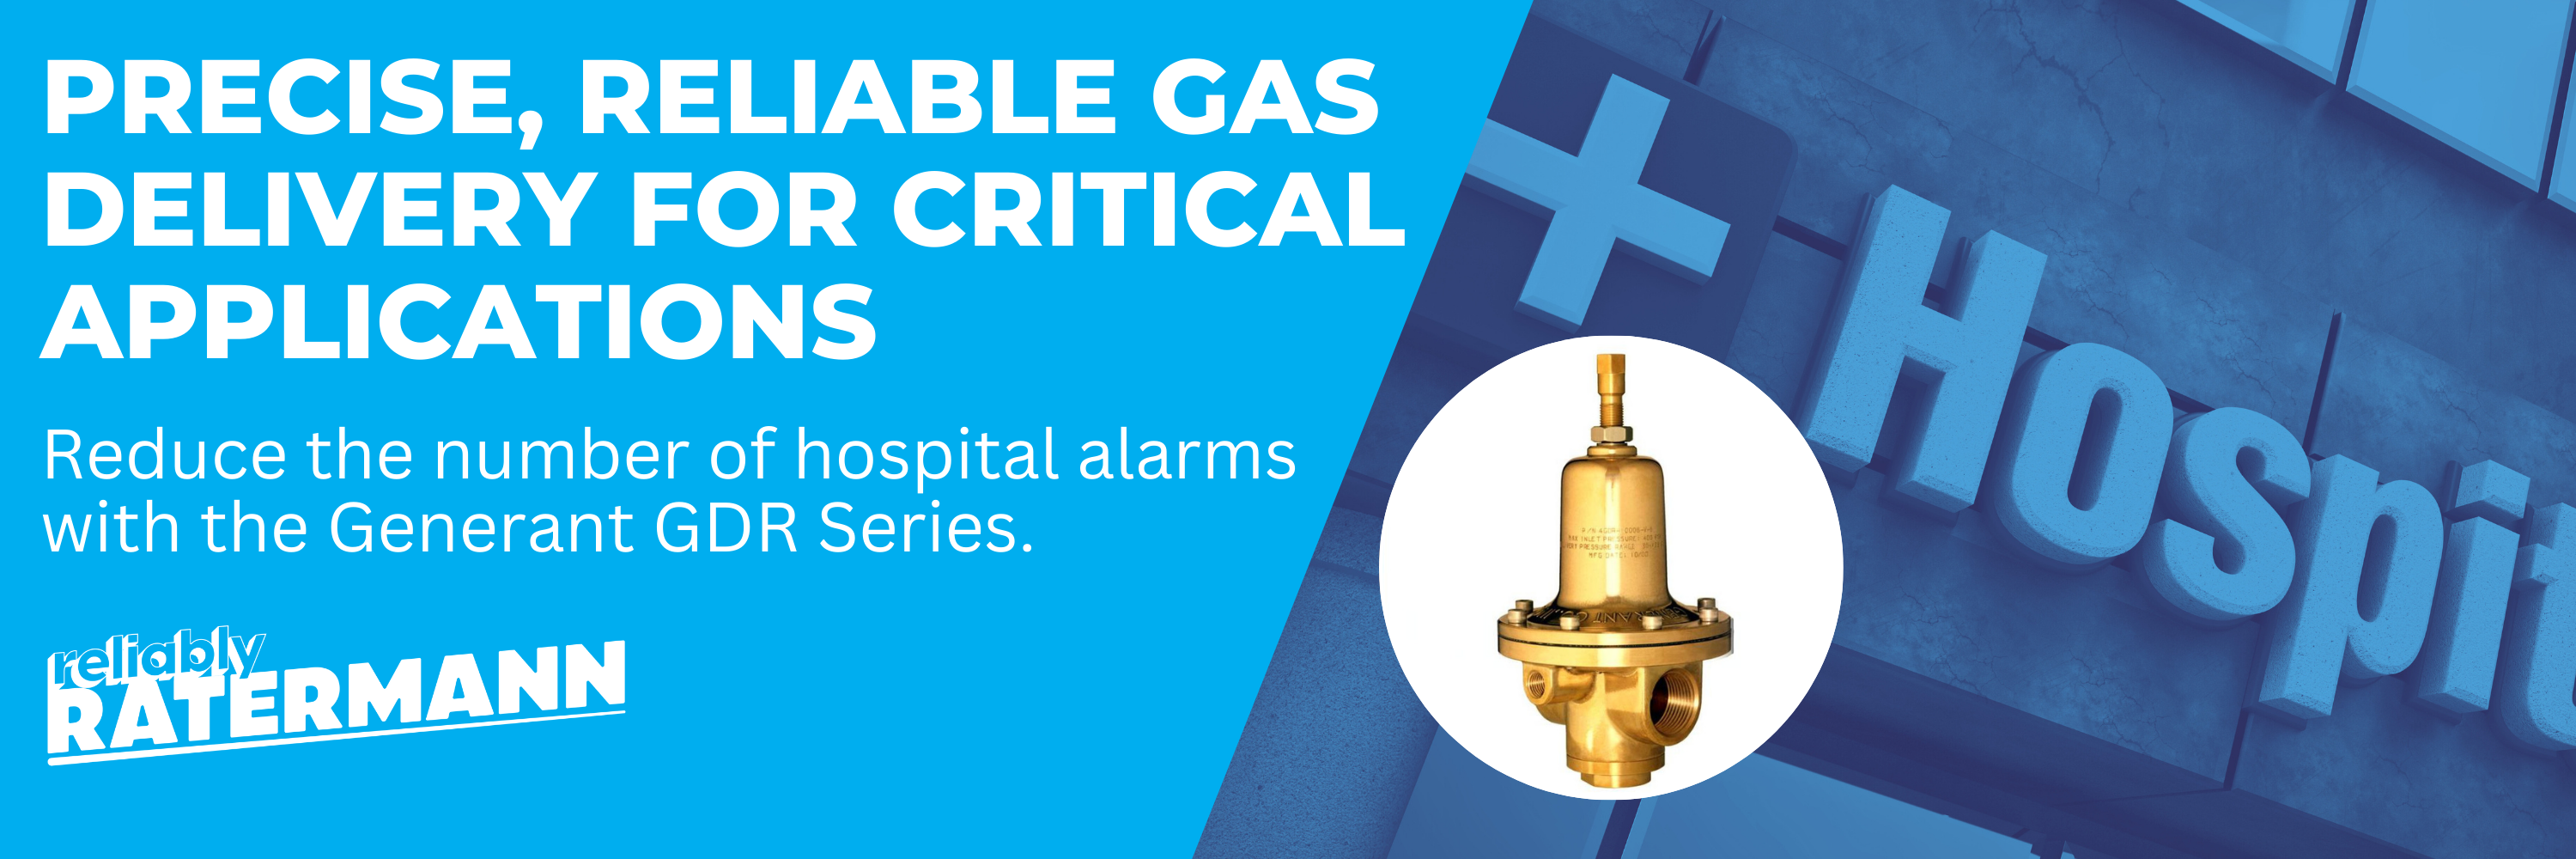 Precise, Reliable Gas Delivery for Critical Applications